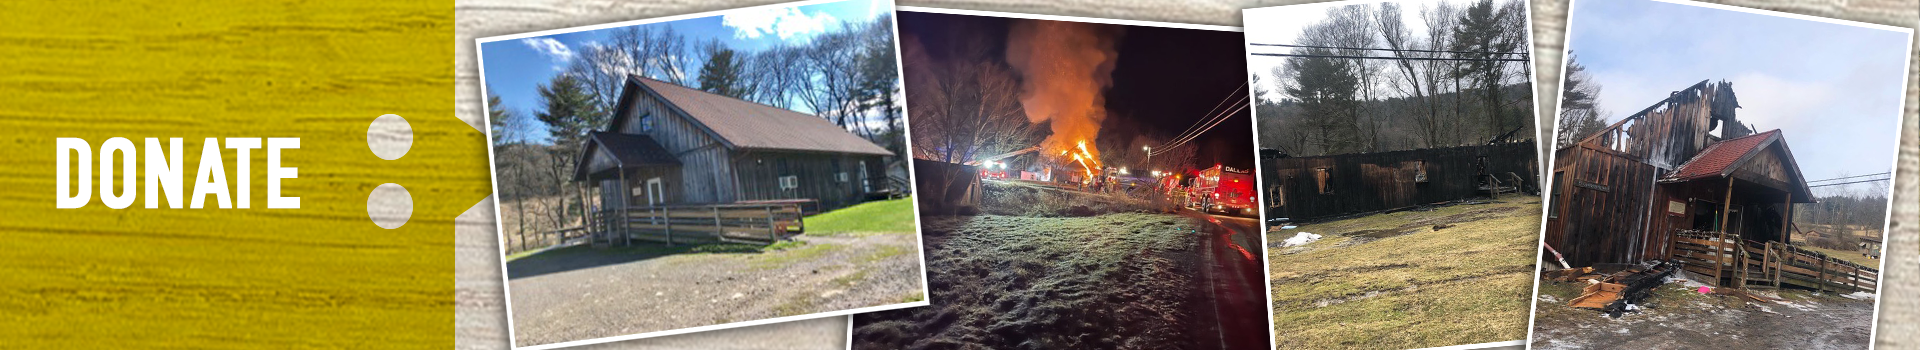 Hillside Education Center for summer camps caught on fire